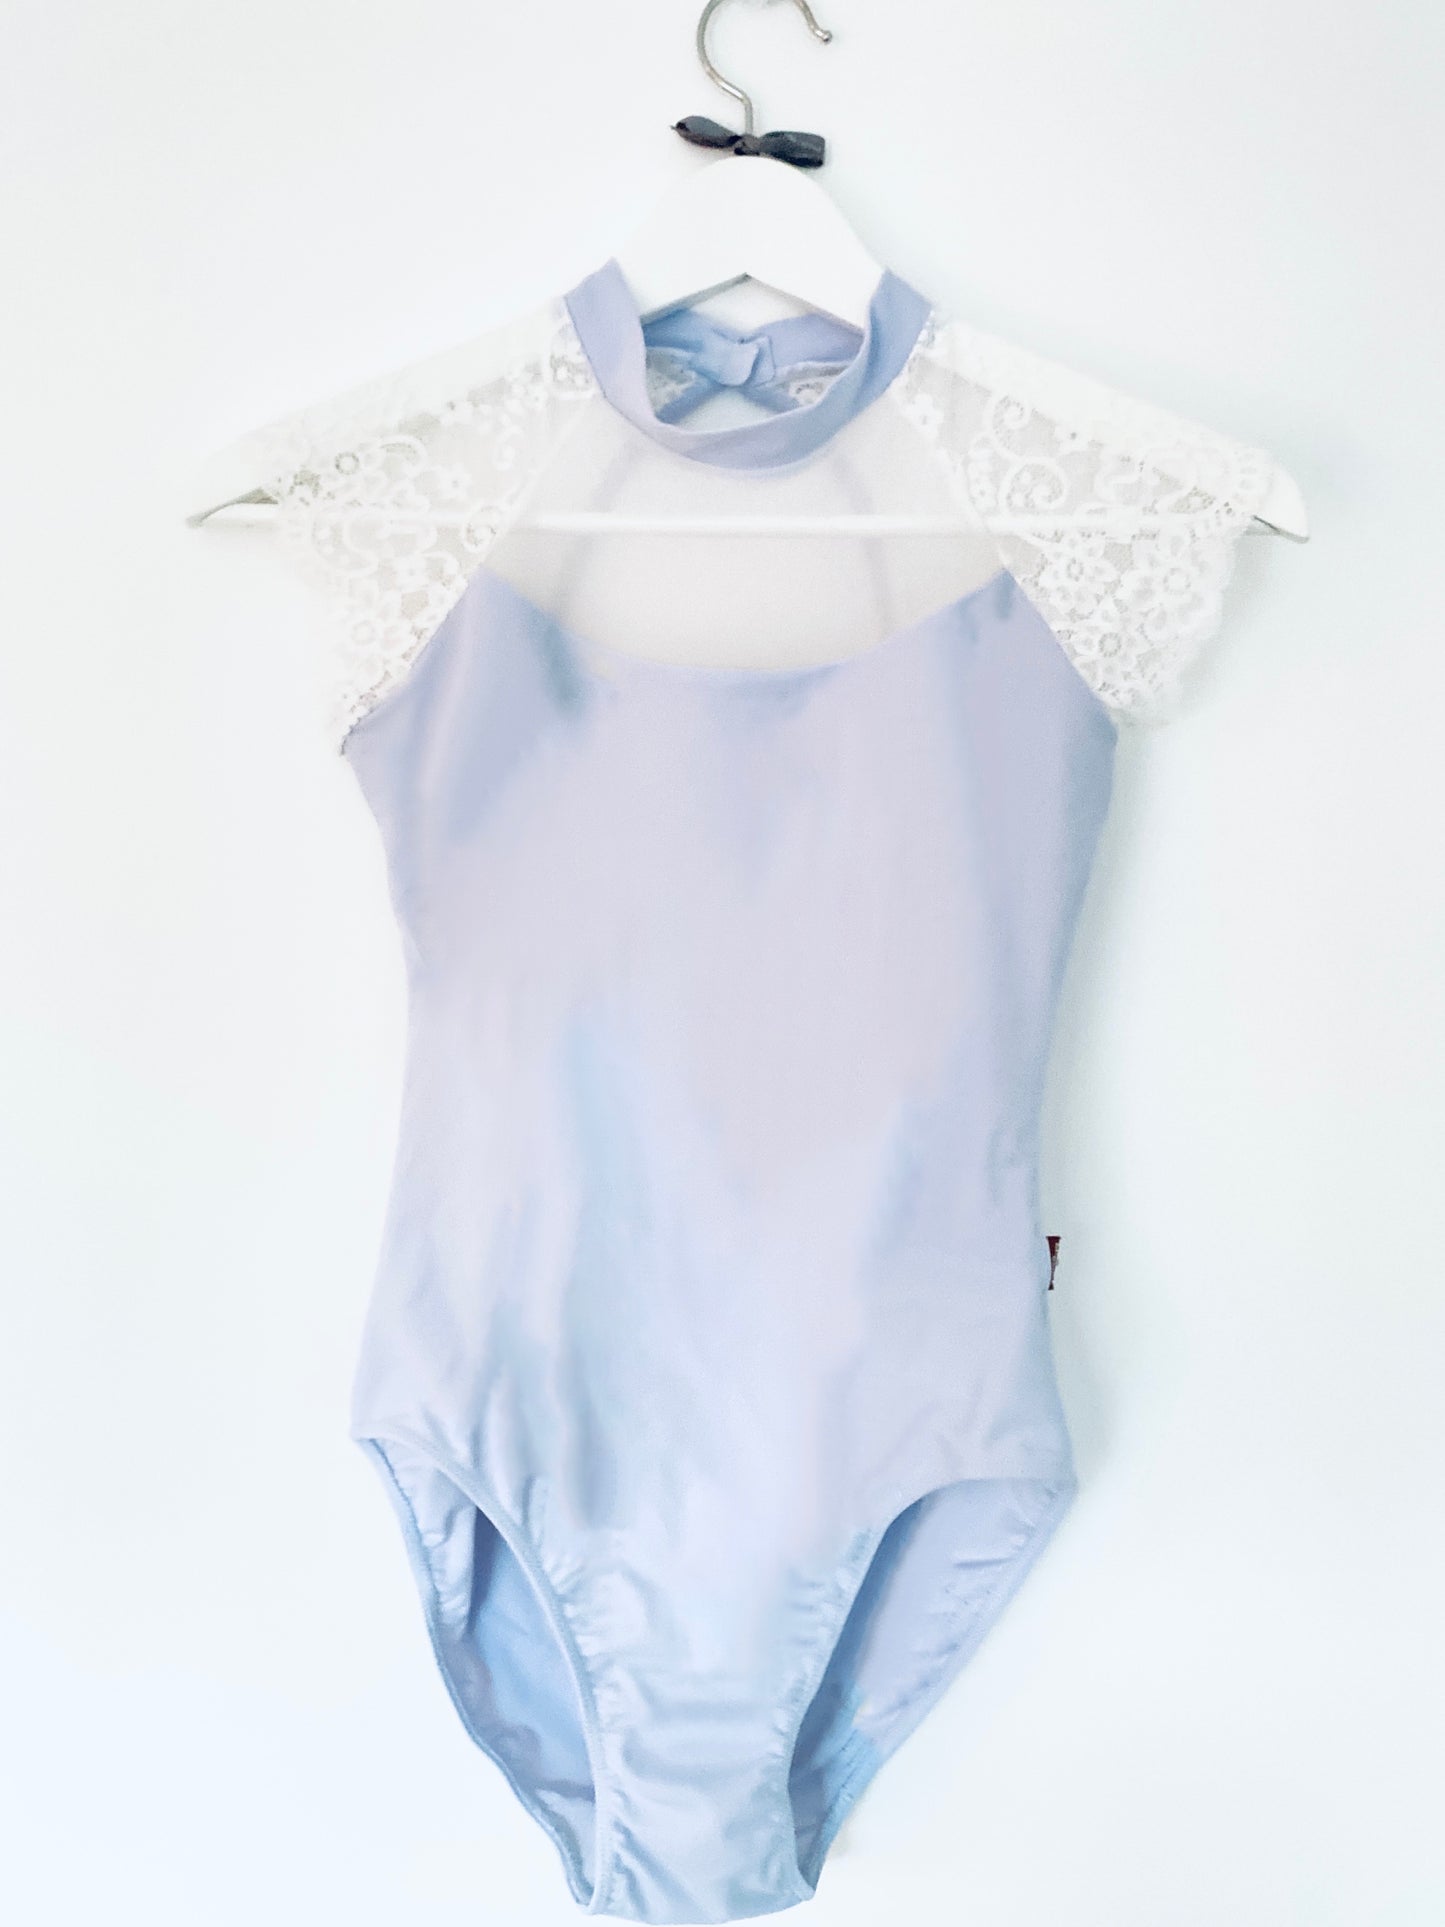 Beautiful leotard in pale blue with laced cap sleeves in white and a high neck from The Collective Dancewear